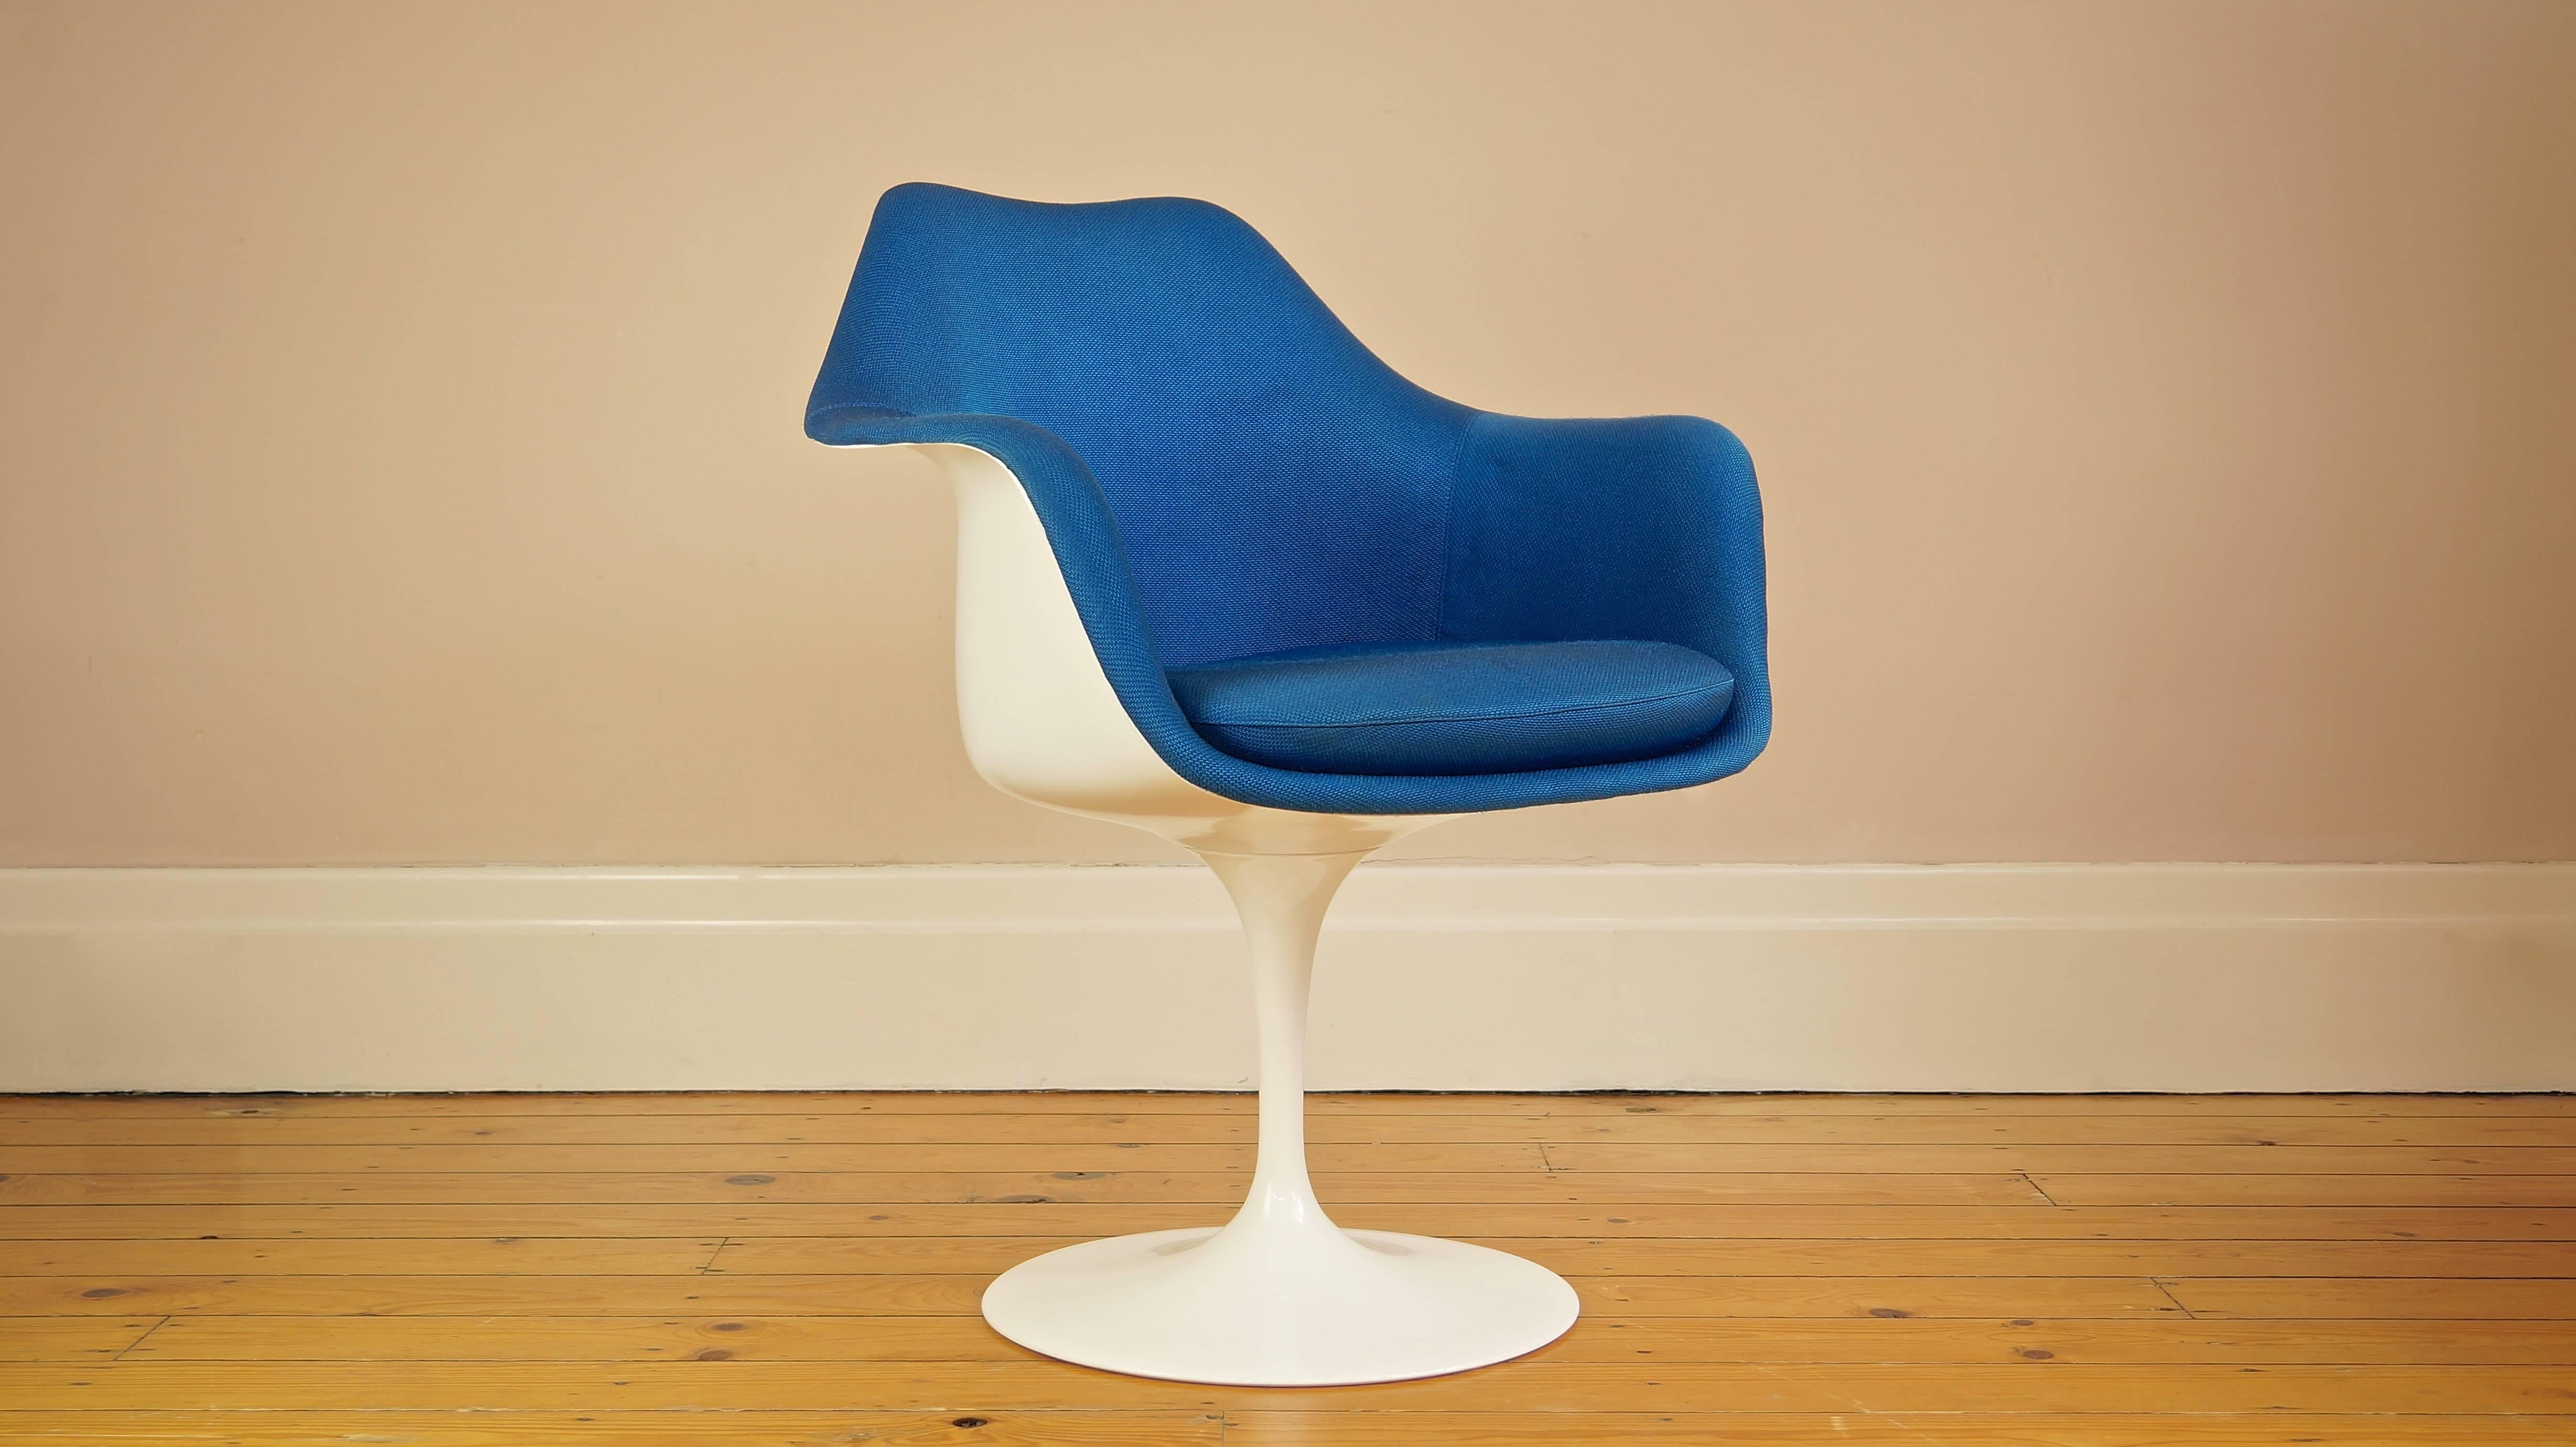 Authentic Knoll tulip armchair. 

Designer: Eero Saarinen - Knoll, USA.
Designed circa 1956.

A genuine Eero Saarinen tulip armchair, manufactured by Knoll.

Incredibly rare fully upholstered version, offered here in blue.

These were